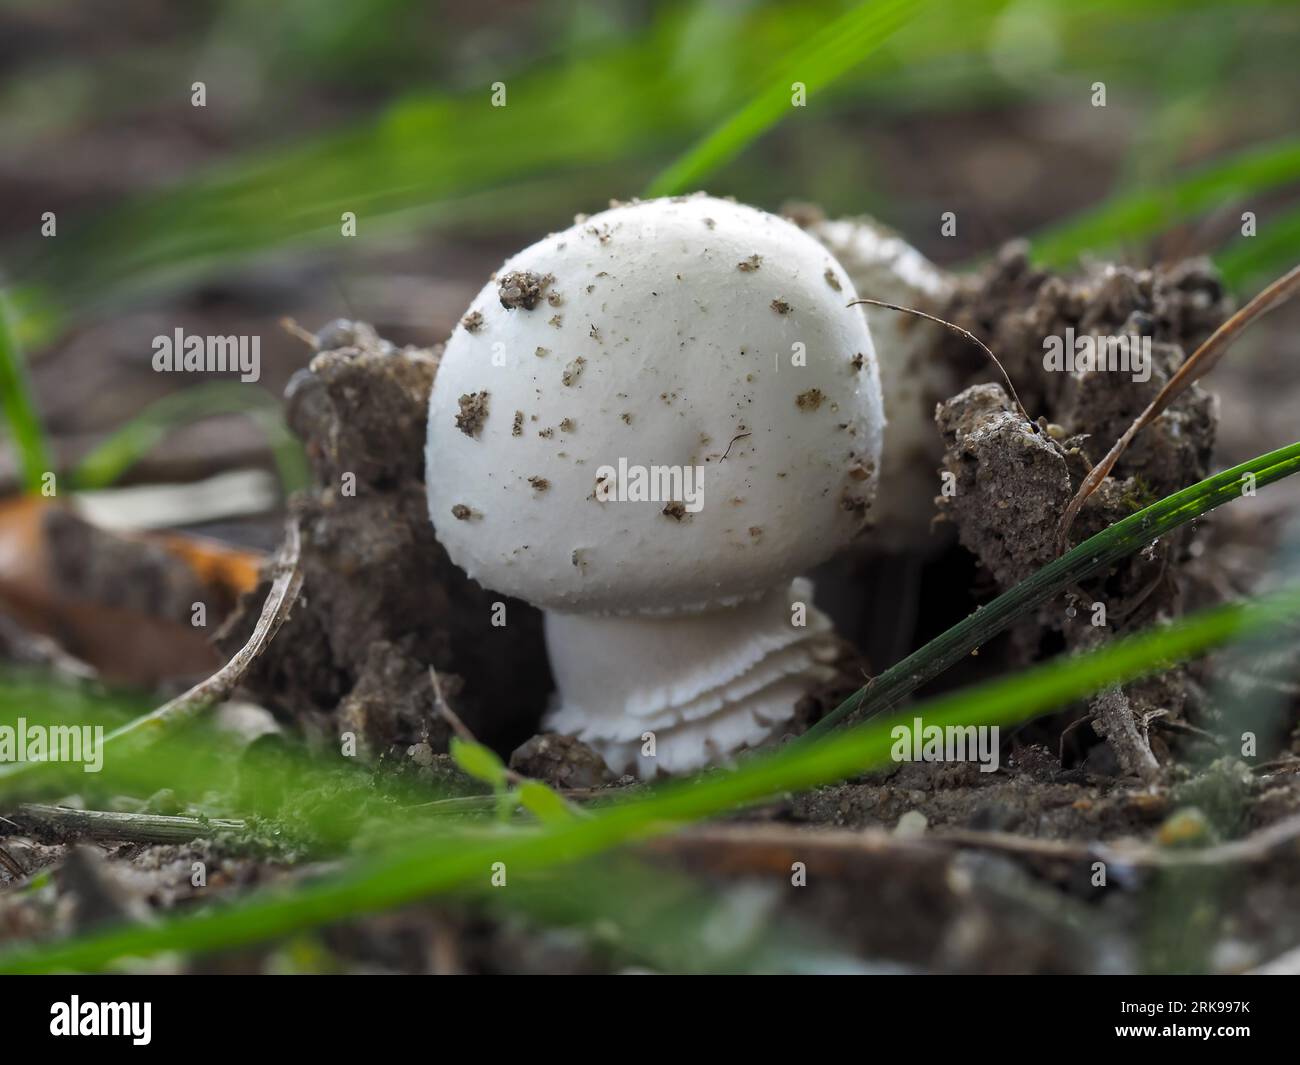 Tuberous mushroom in natural habitat,Agaricus silvicola,Edible mushroom,tasty,anise scent,white bell-shaped young mushroom fruiting body close up on a Stock Photo